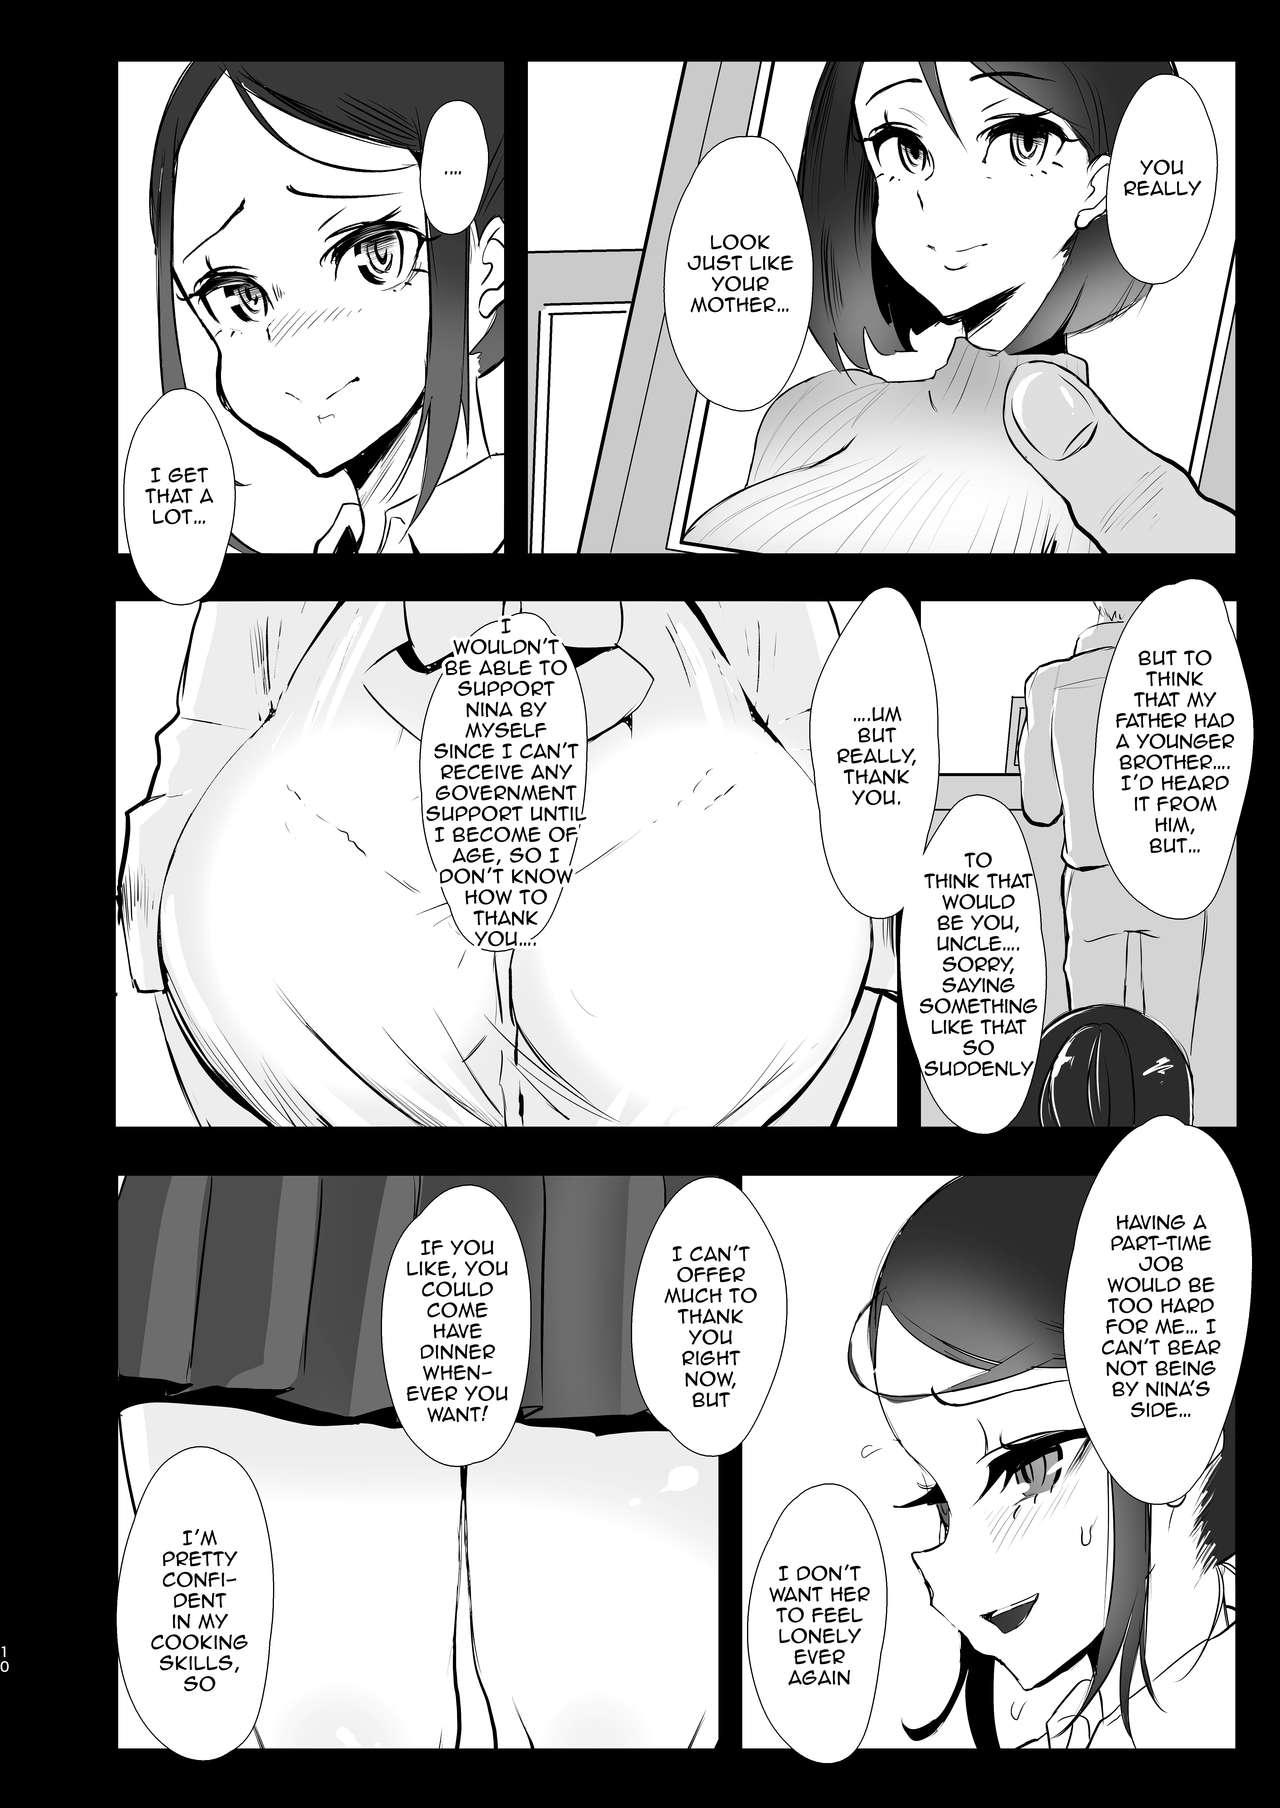 Licking Himawari no Kage | The Other Side of the Sunflower - Original Hardcore - Page 9